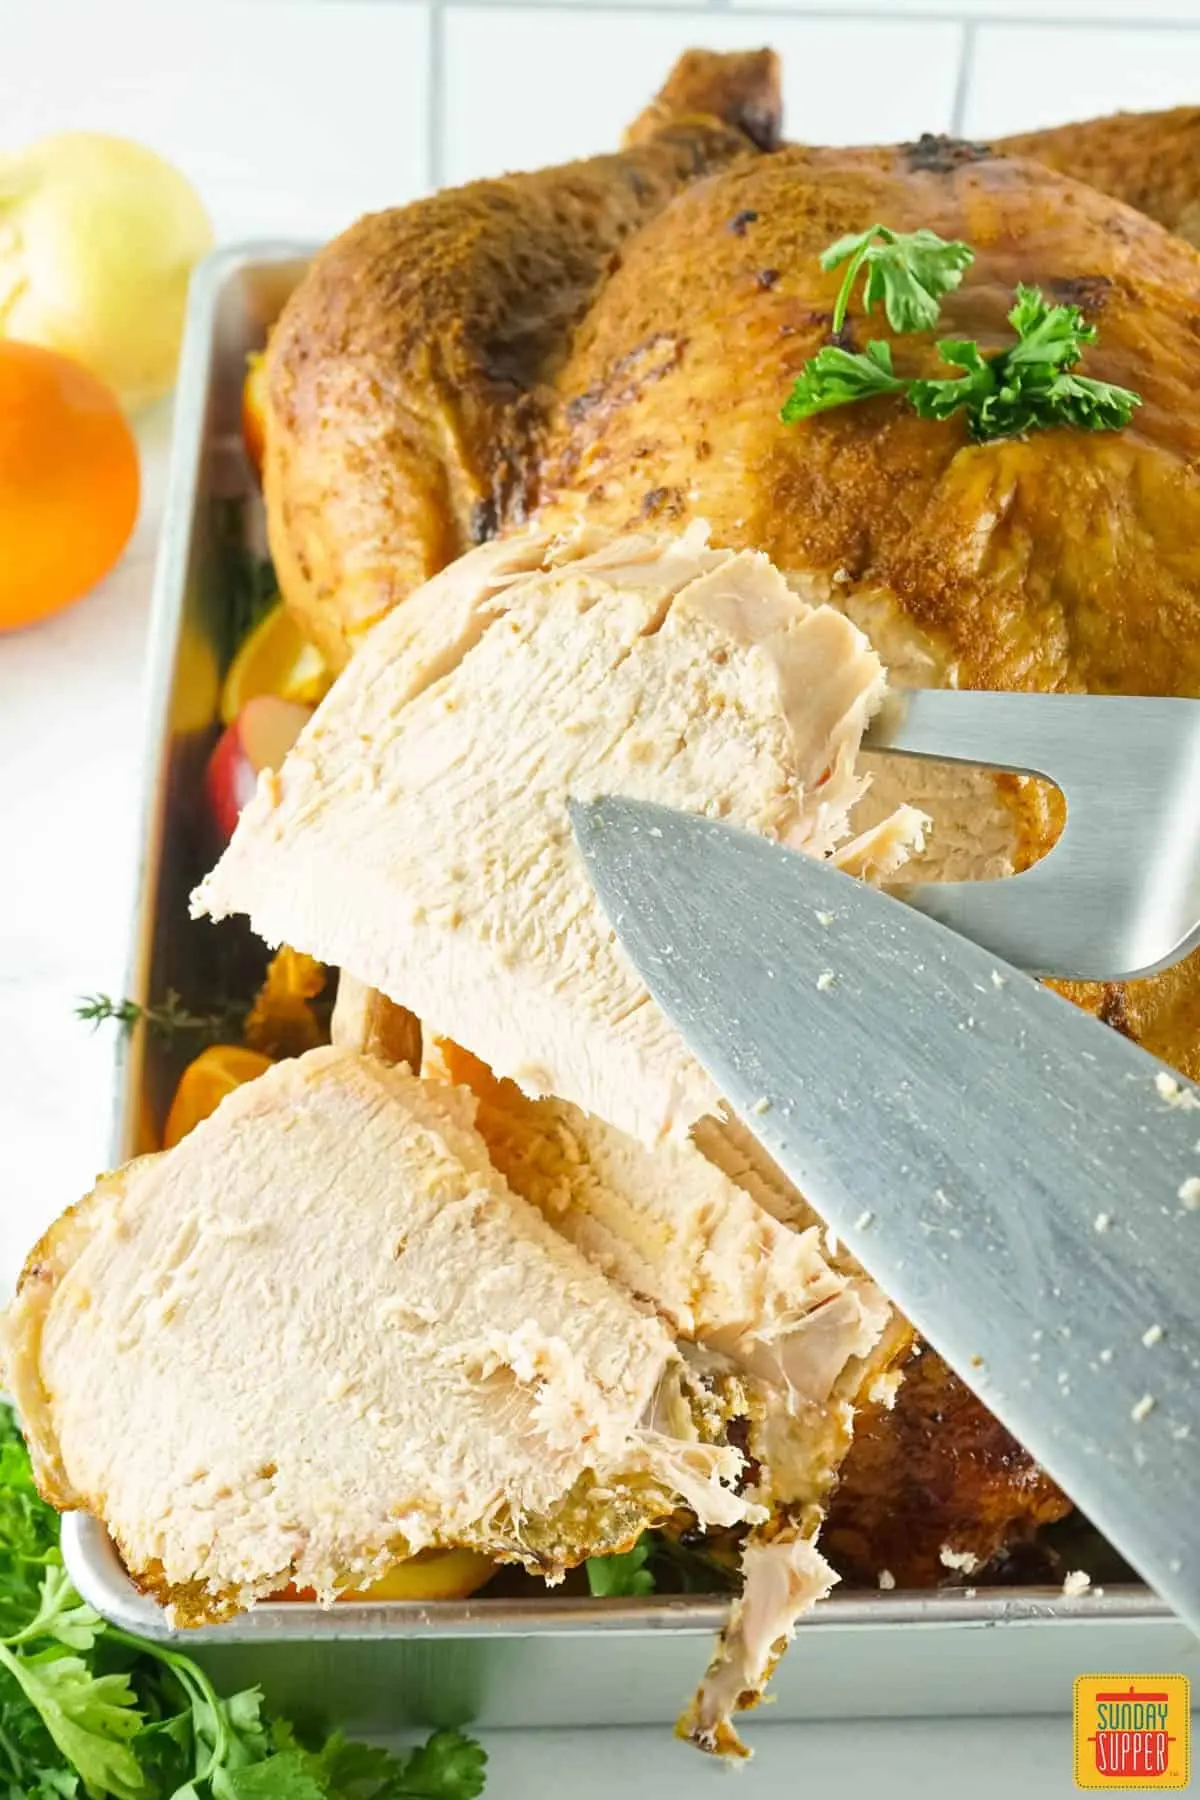 butter injected smoked turkey - Are butter infused turkey good